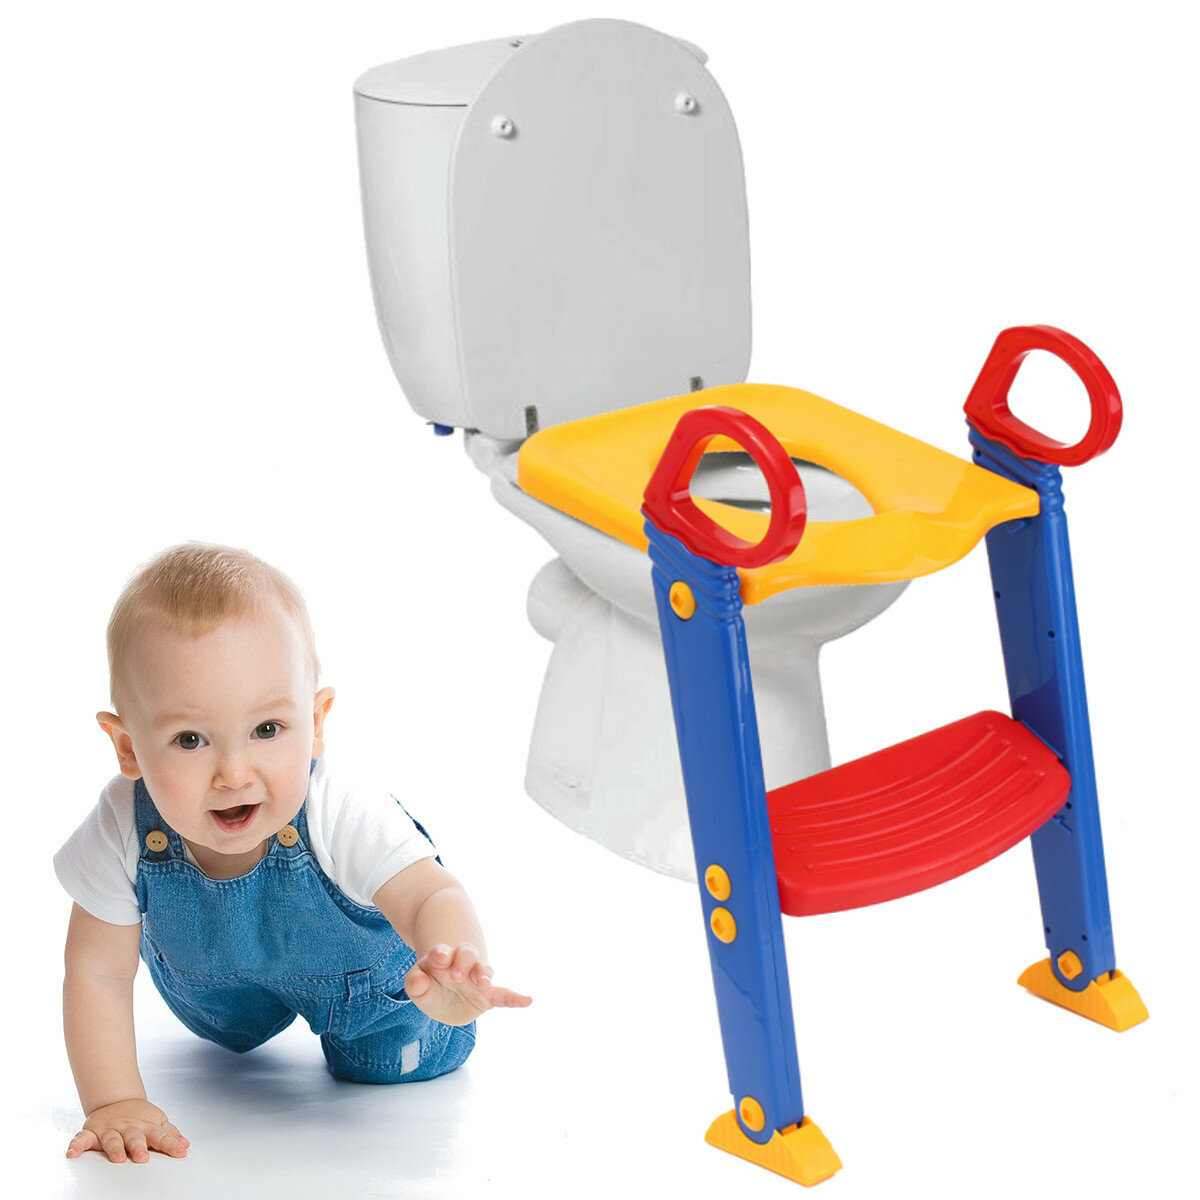 Kinder Toilet Ladder Baby Training Toilet Step Non-slip Potty Seat Trainer Max Load 50KG